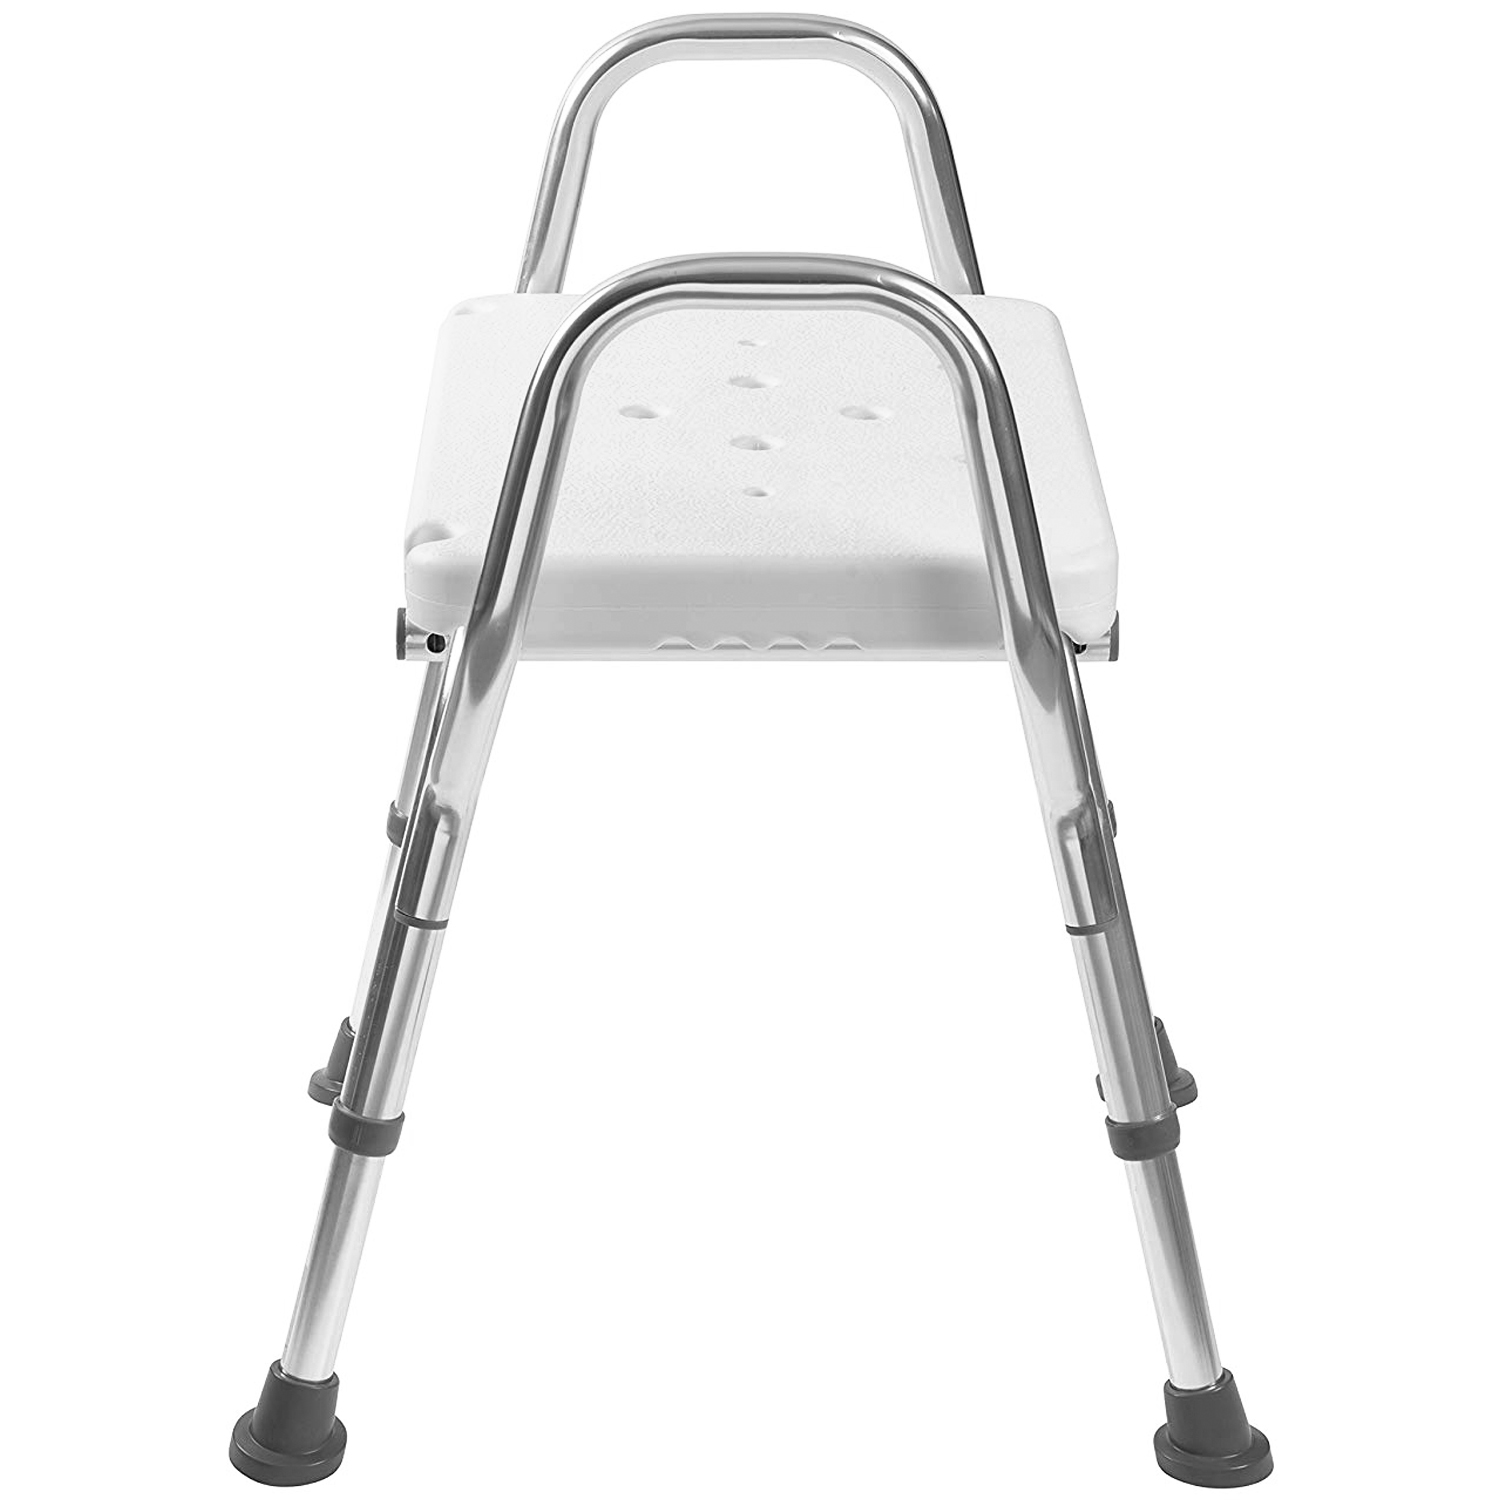 DMI Shower Chair, 16-20"H, 19 x 13 Seat, 350 lb Capacity - image 4 of 7